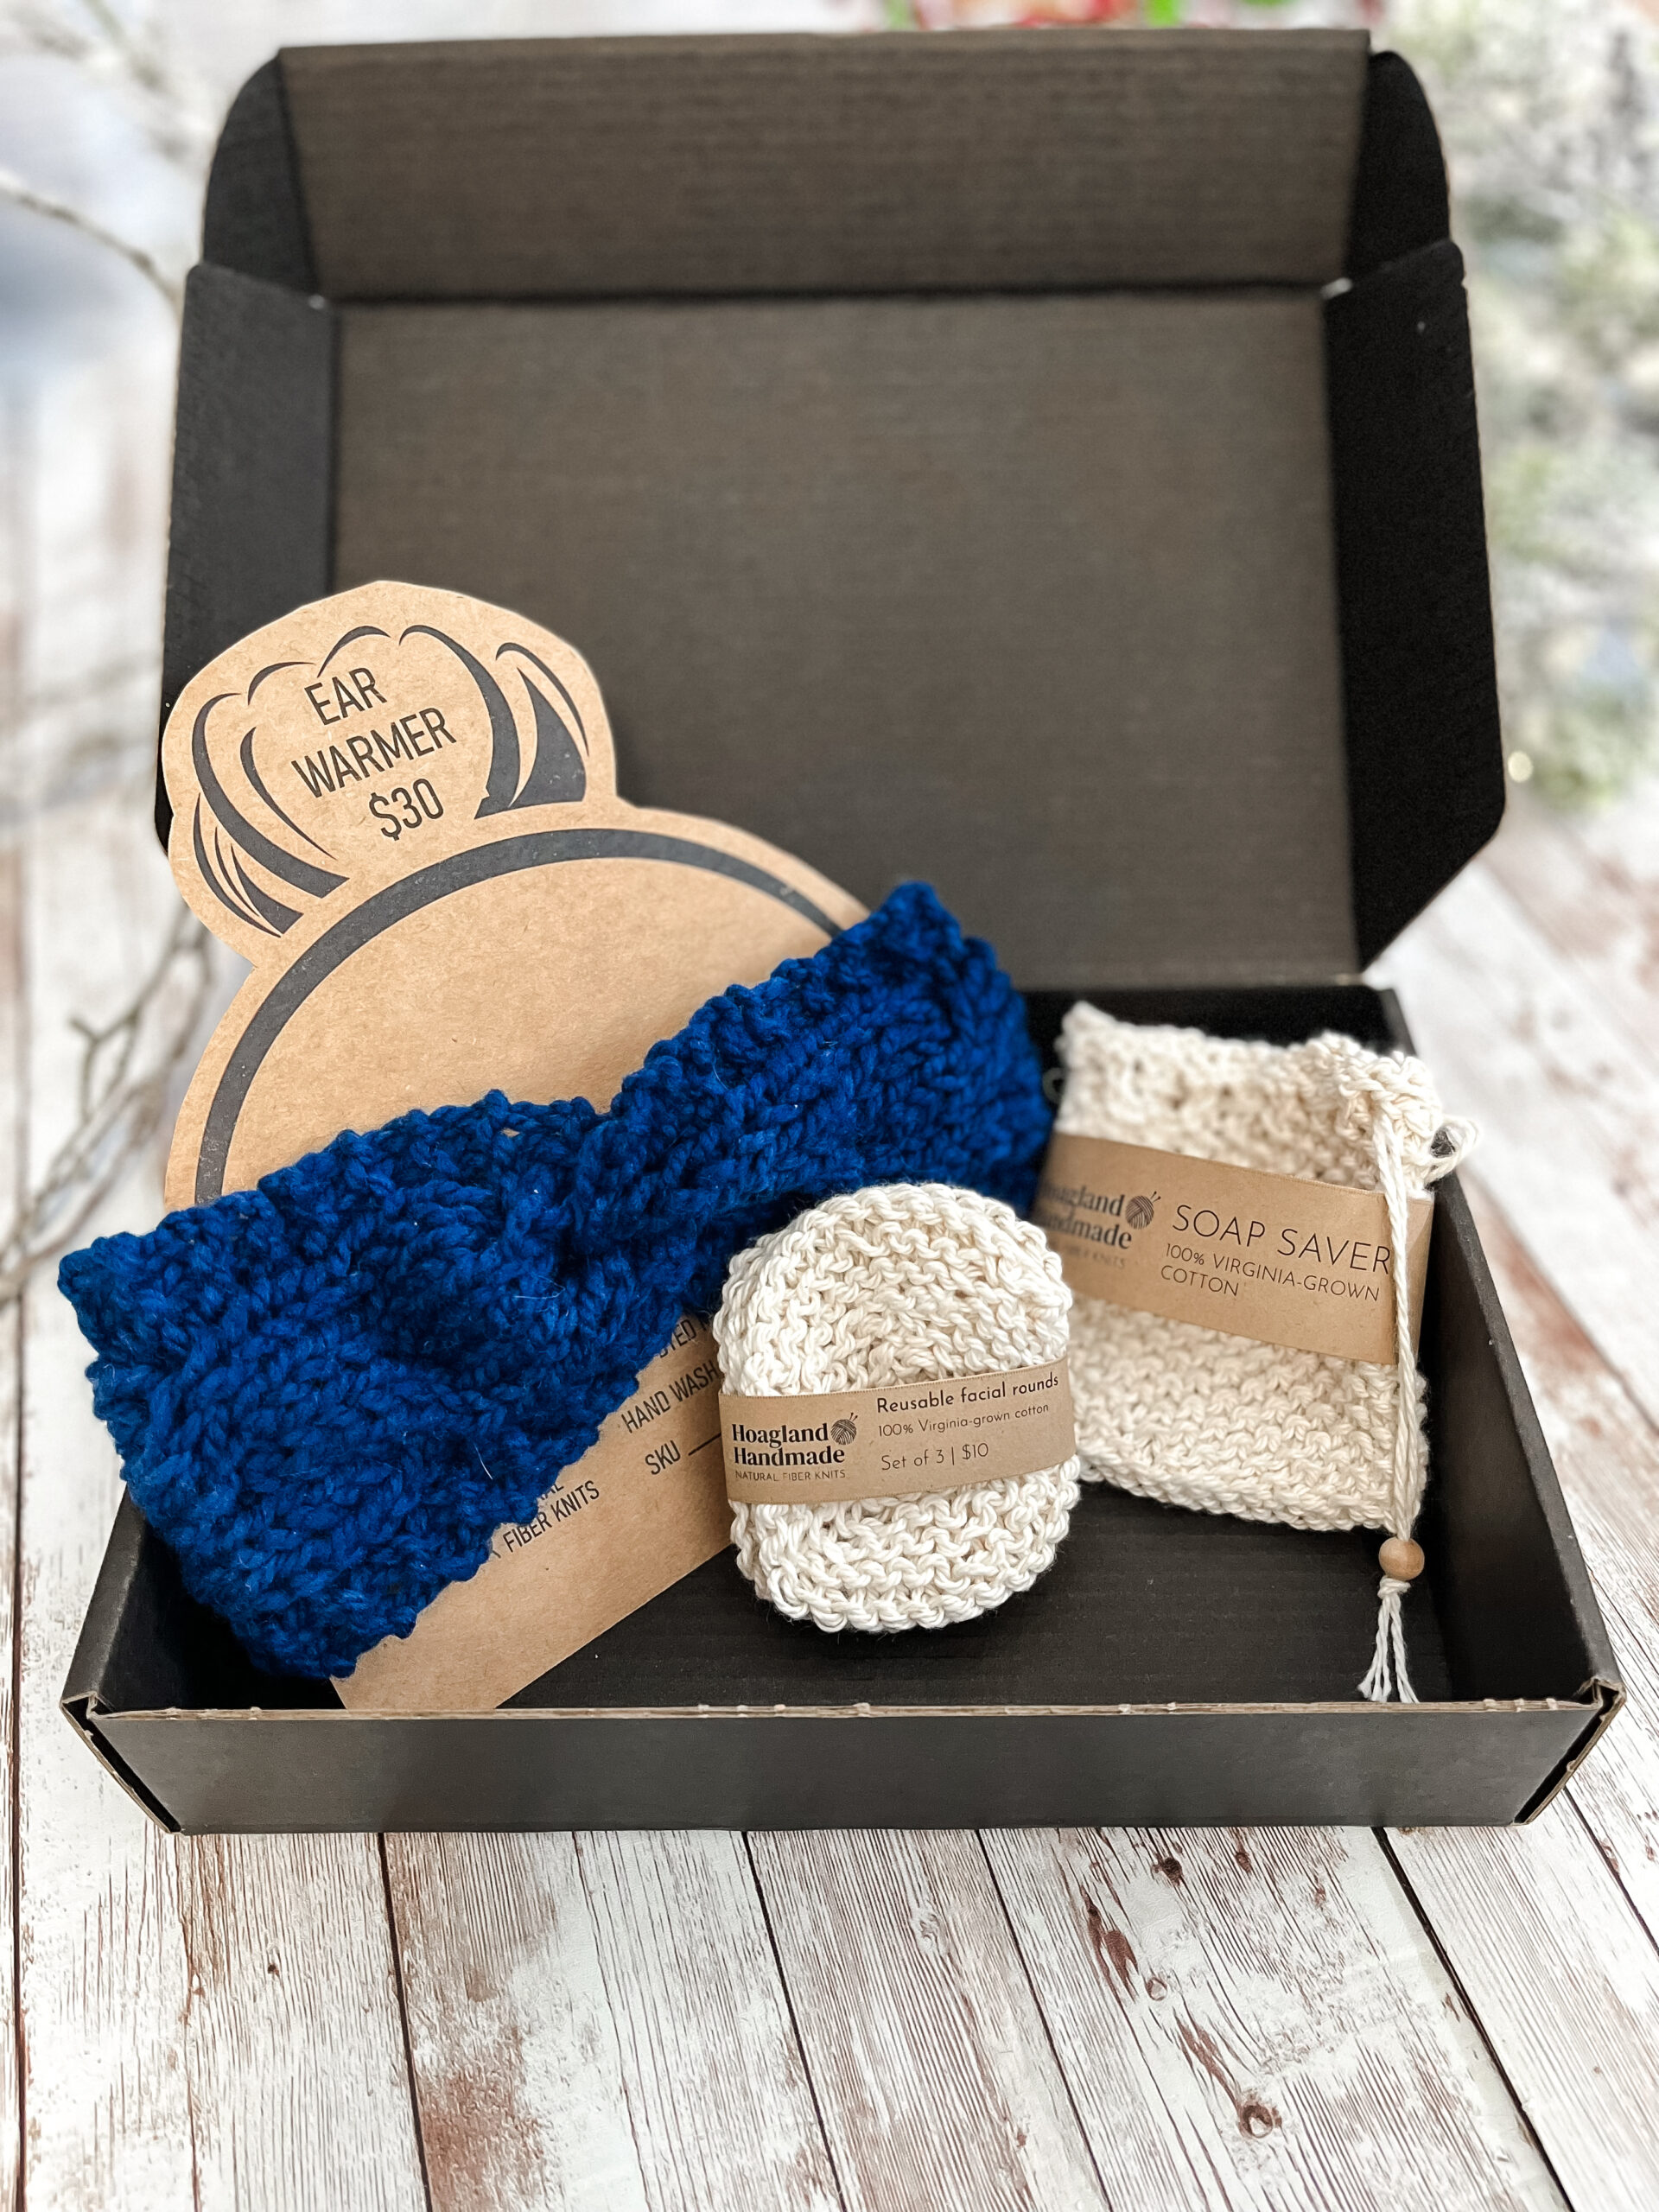 A black box contains a blue hand-dyed merino ear warmer displayed on a Kraft paper head with a messy bun, a Virginia-grown cotton soap saver and set of reusable facial rounds.